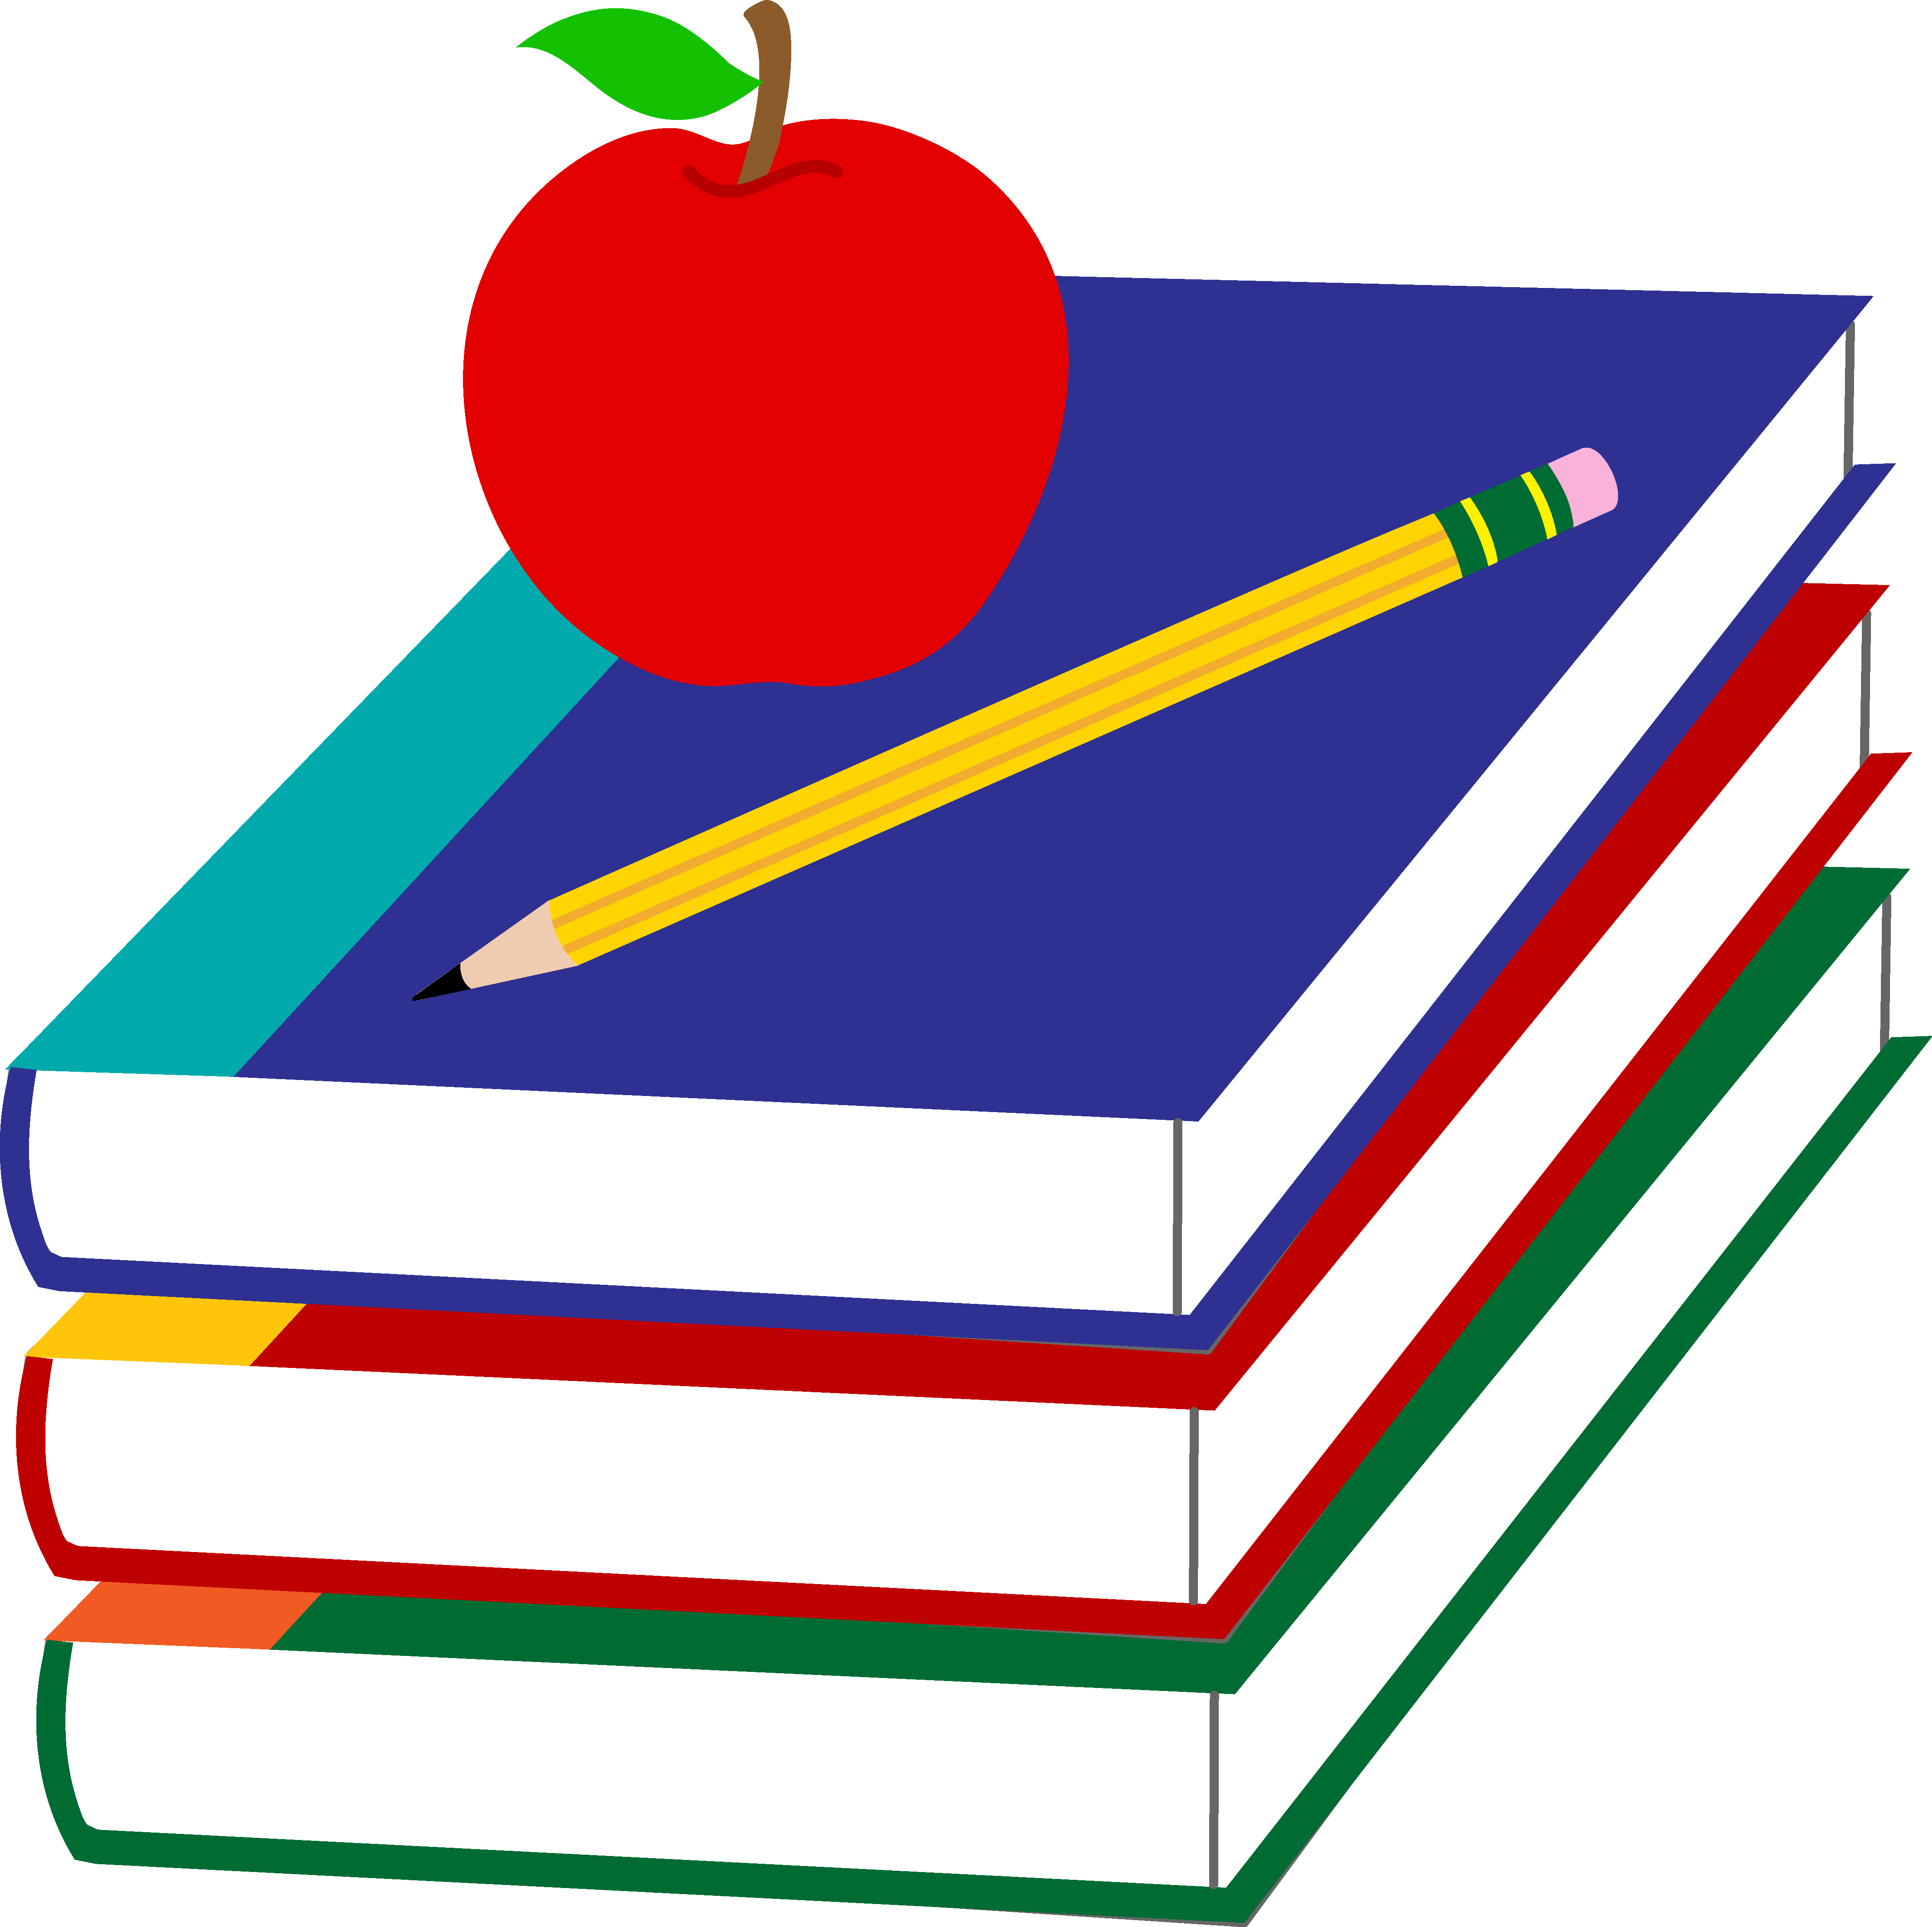 Apple and books clipart clipart 